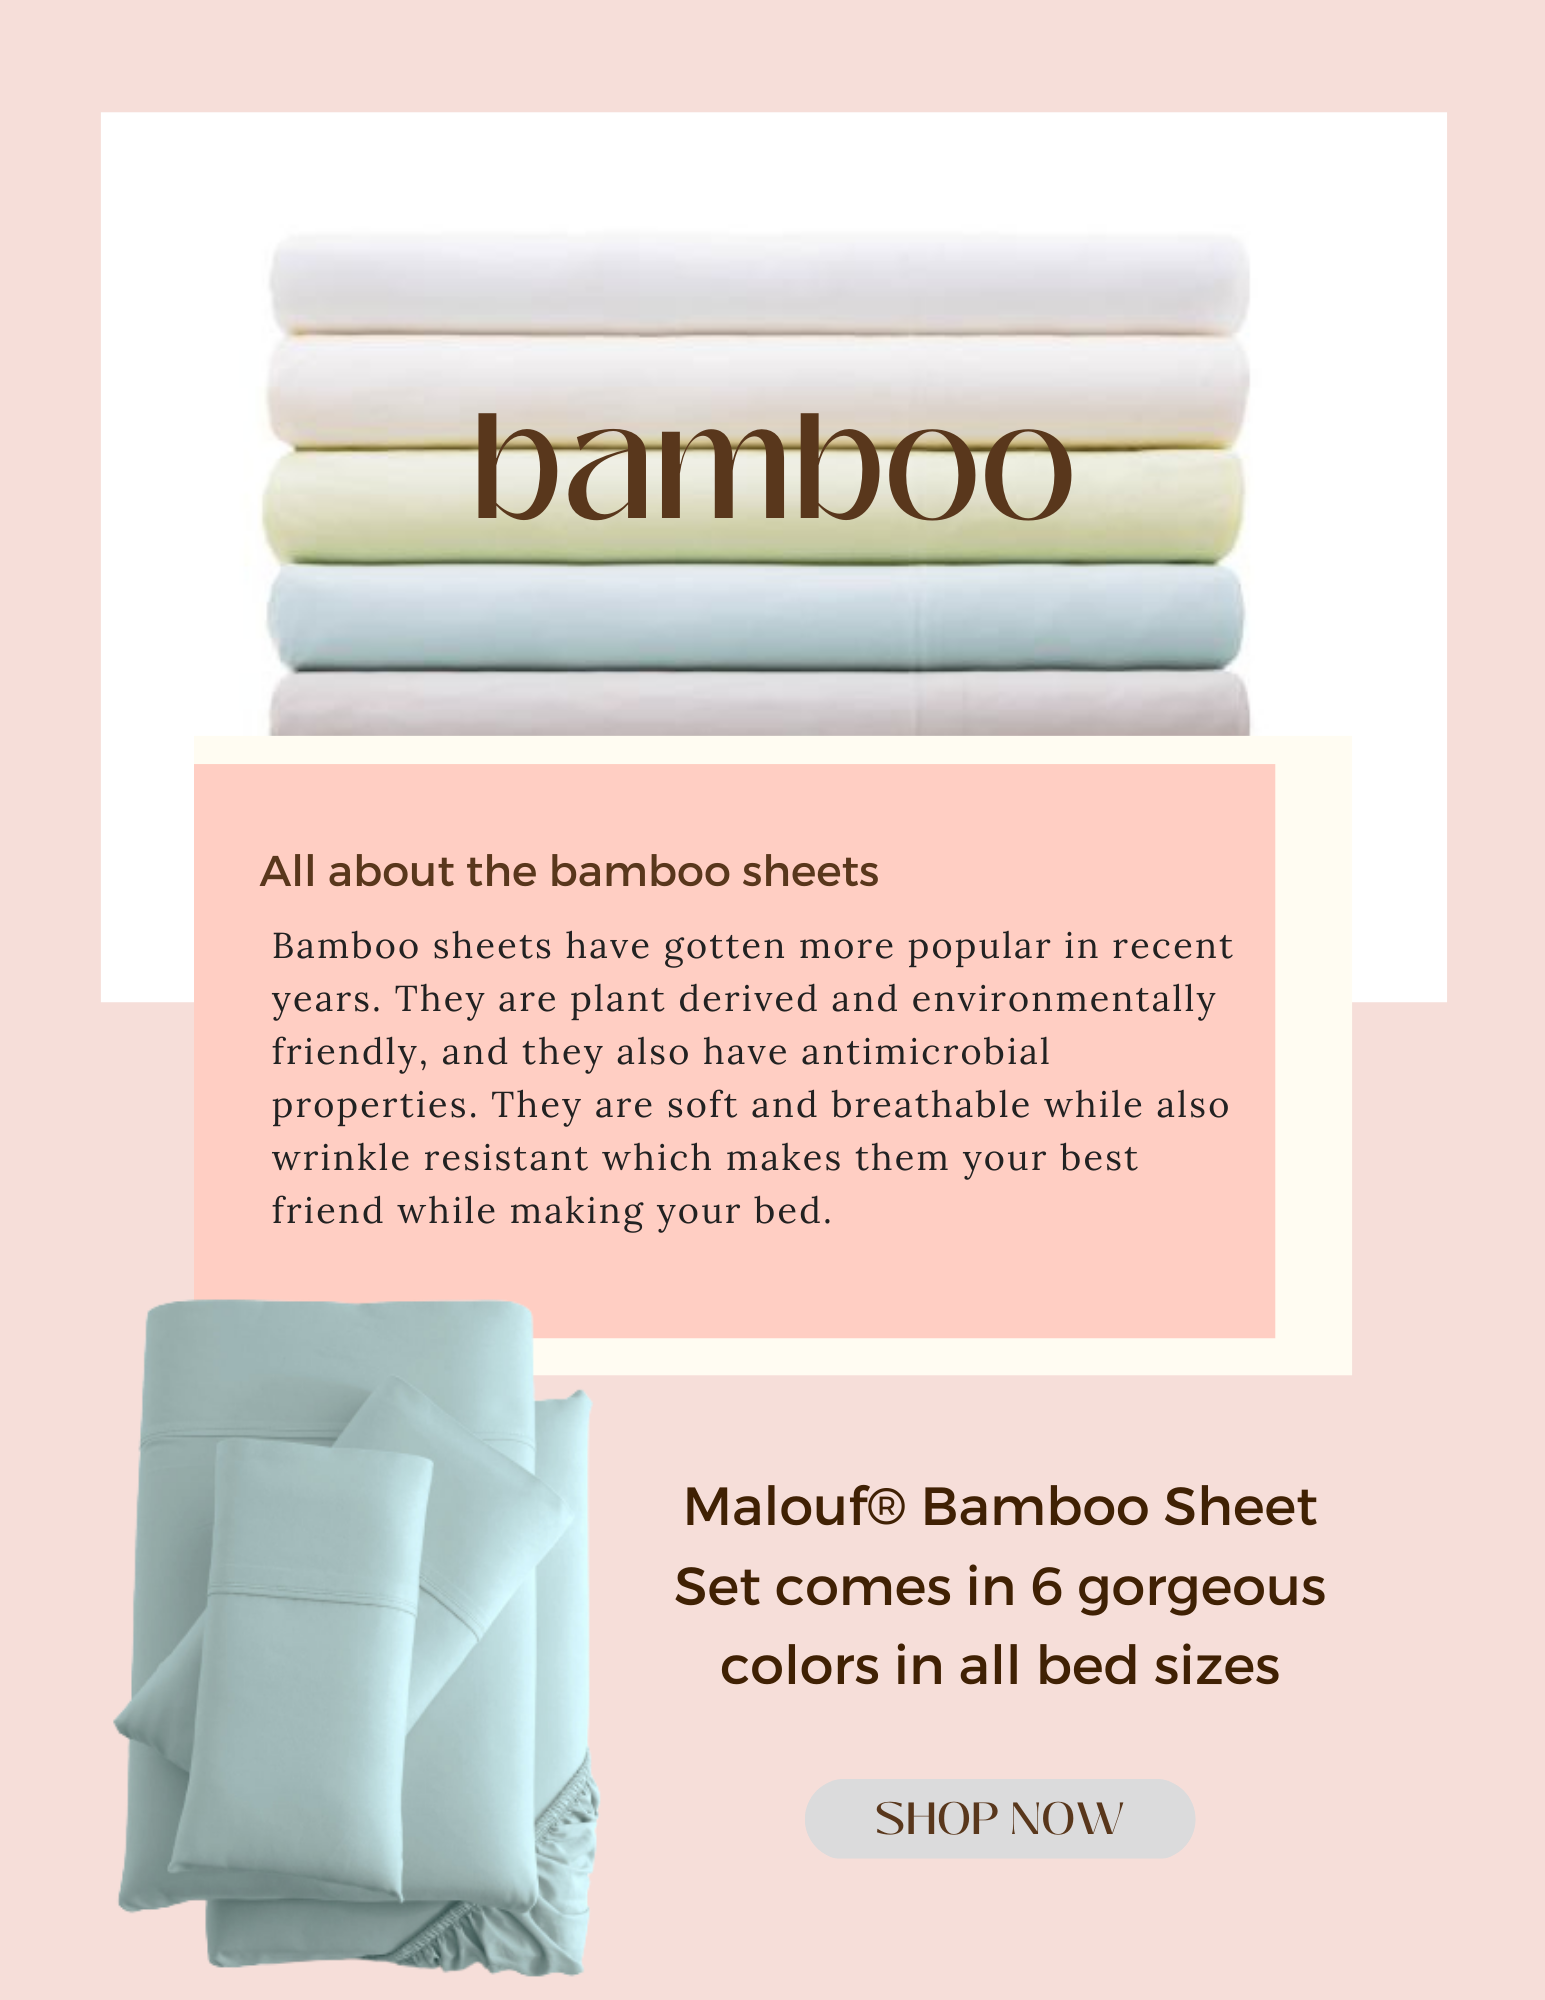 Bamboo sheets have gotten more popular in recent years. They are plant derived and environmentally friendly, and they also have antimicrobial properties. They are soft and breathable while also wrinkle resistant which makes them your best friend while making your bed.